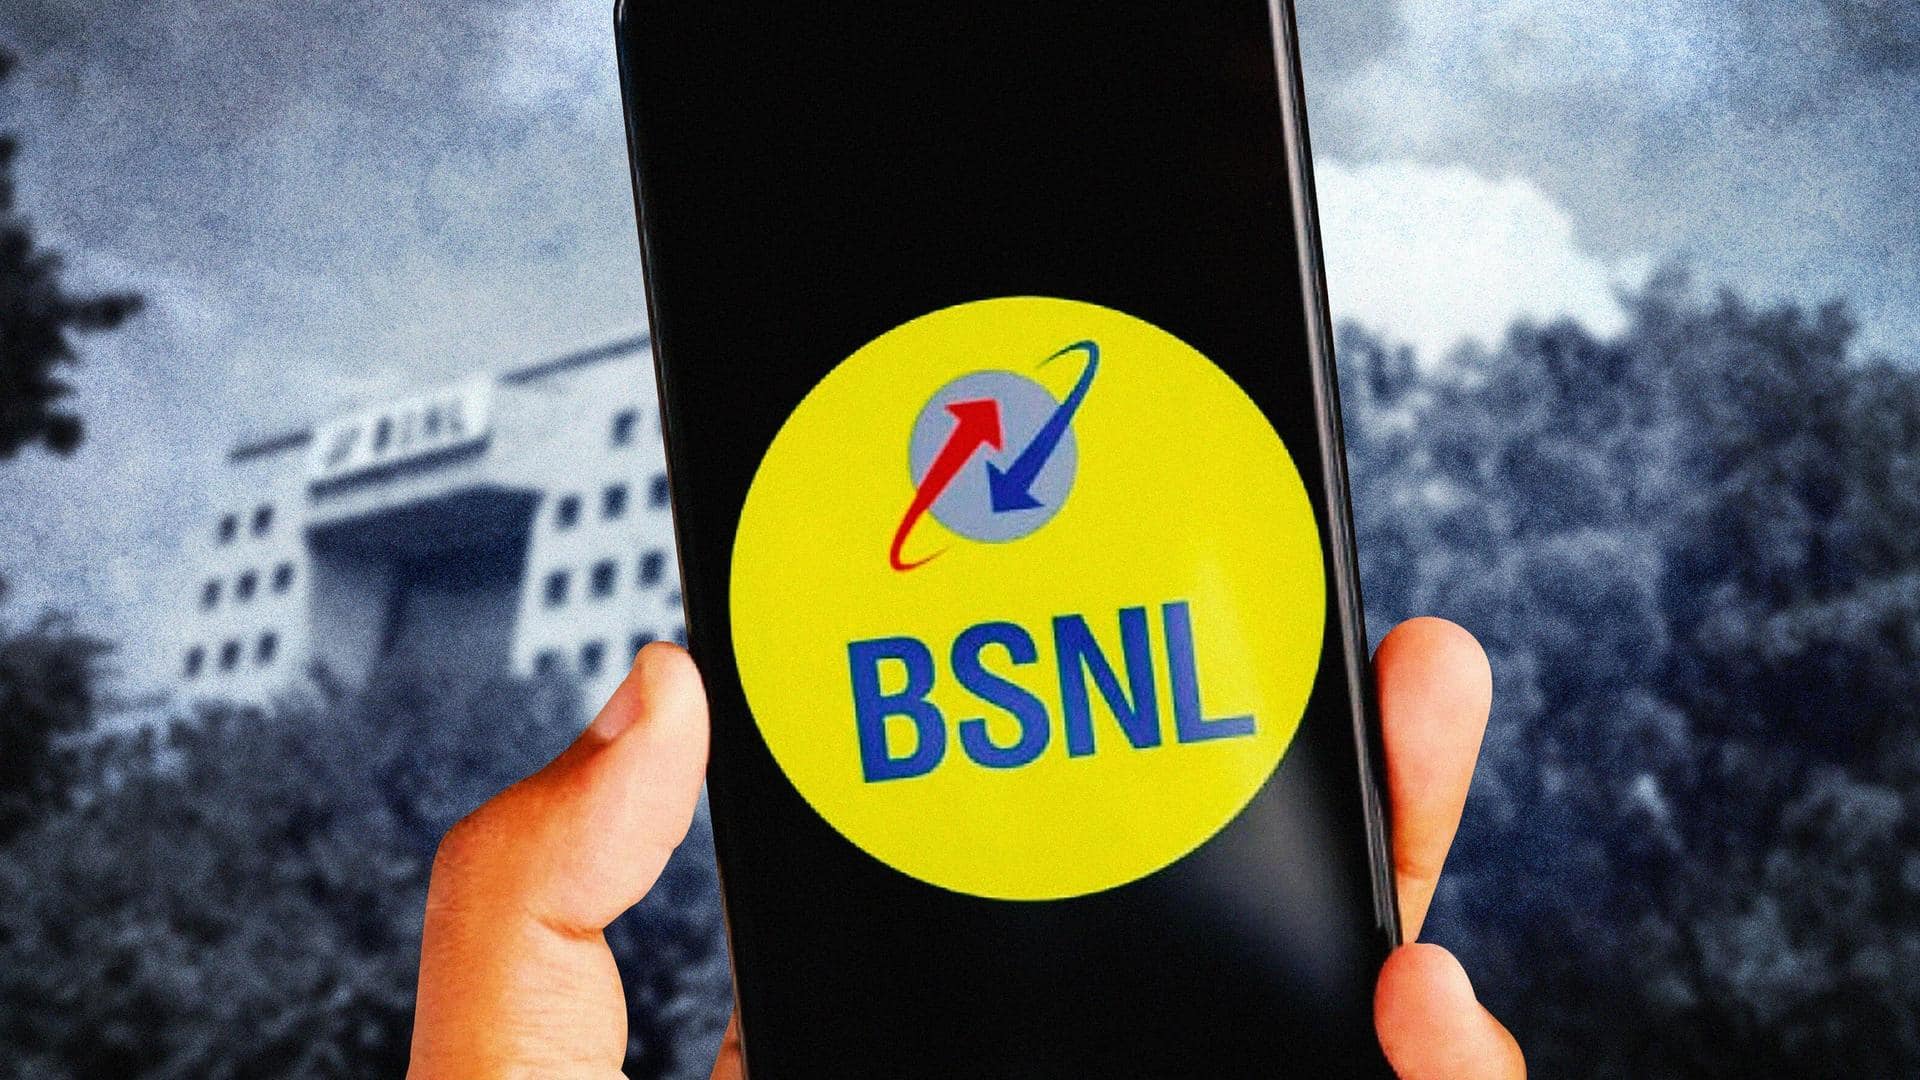 BSNL is re-emerging from shadows: How is telco reviving itself